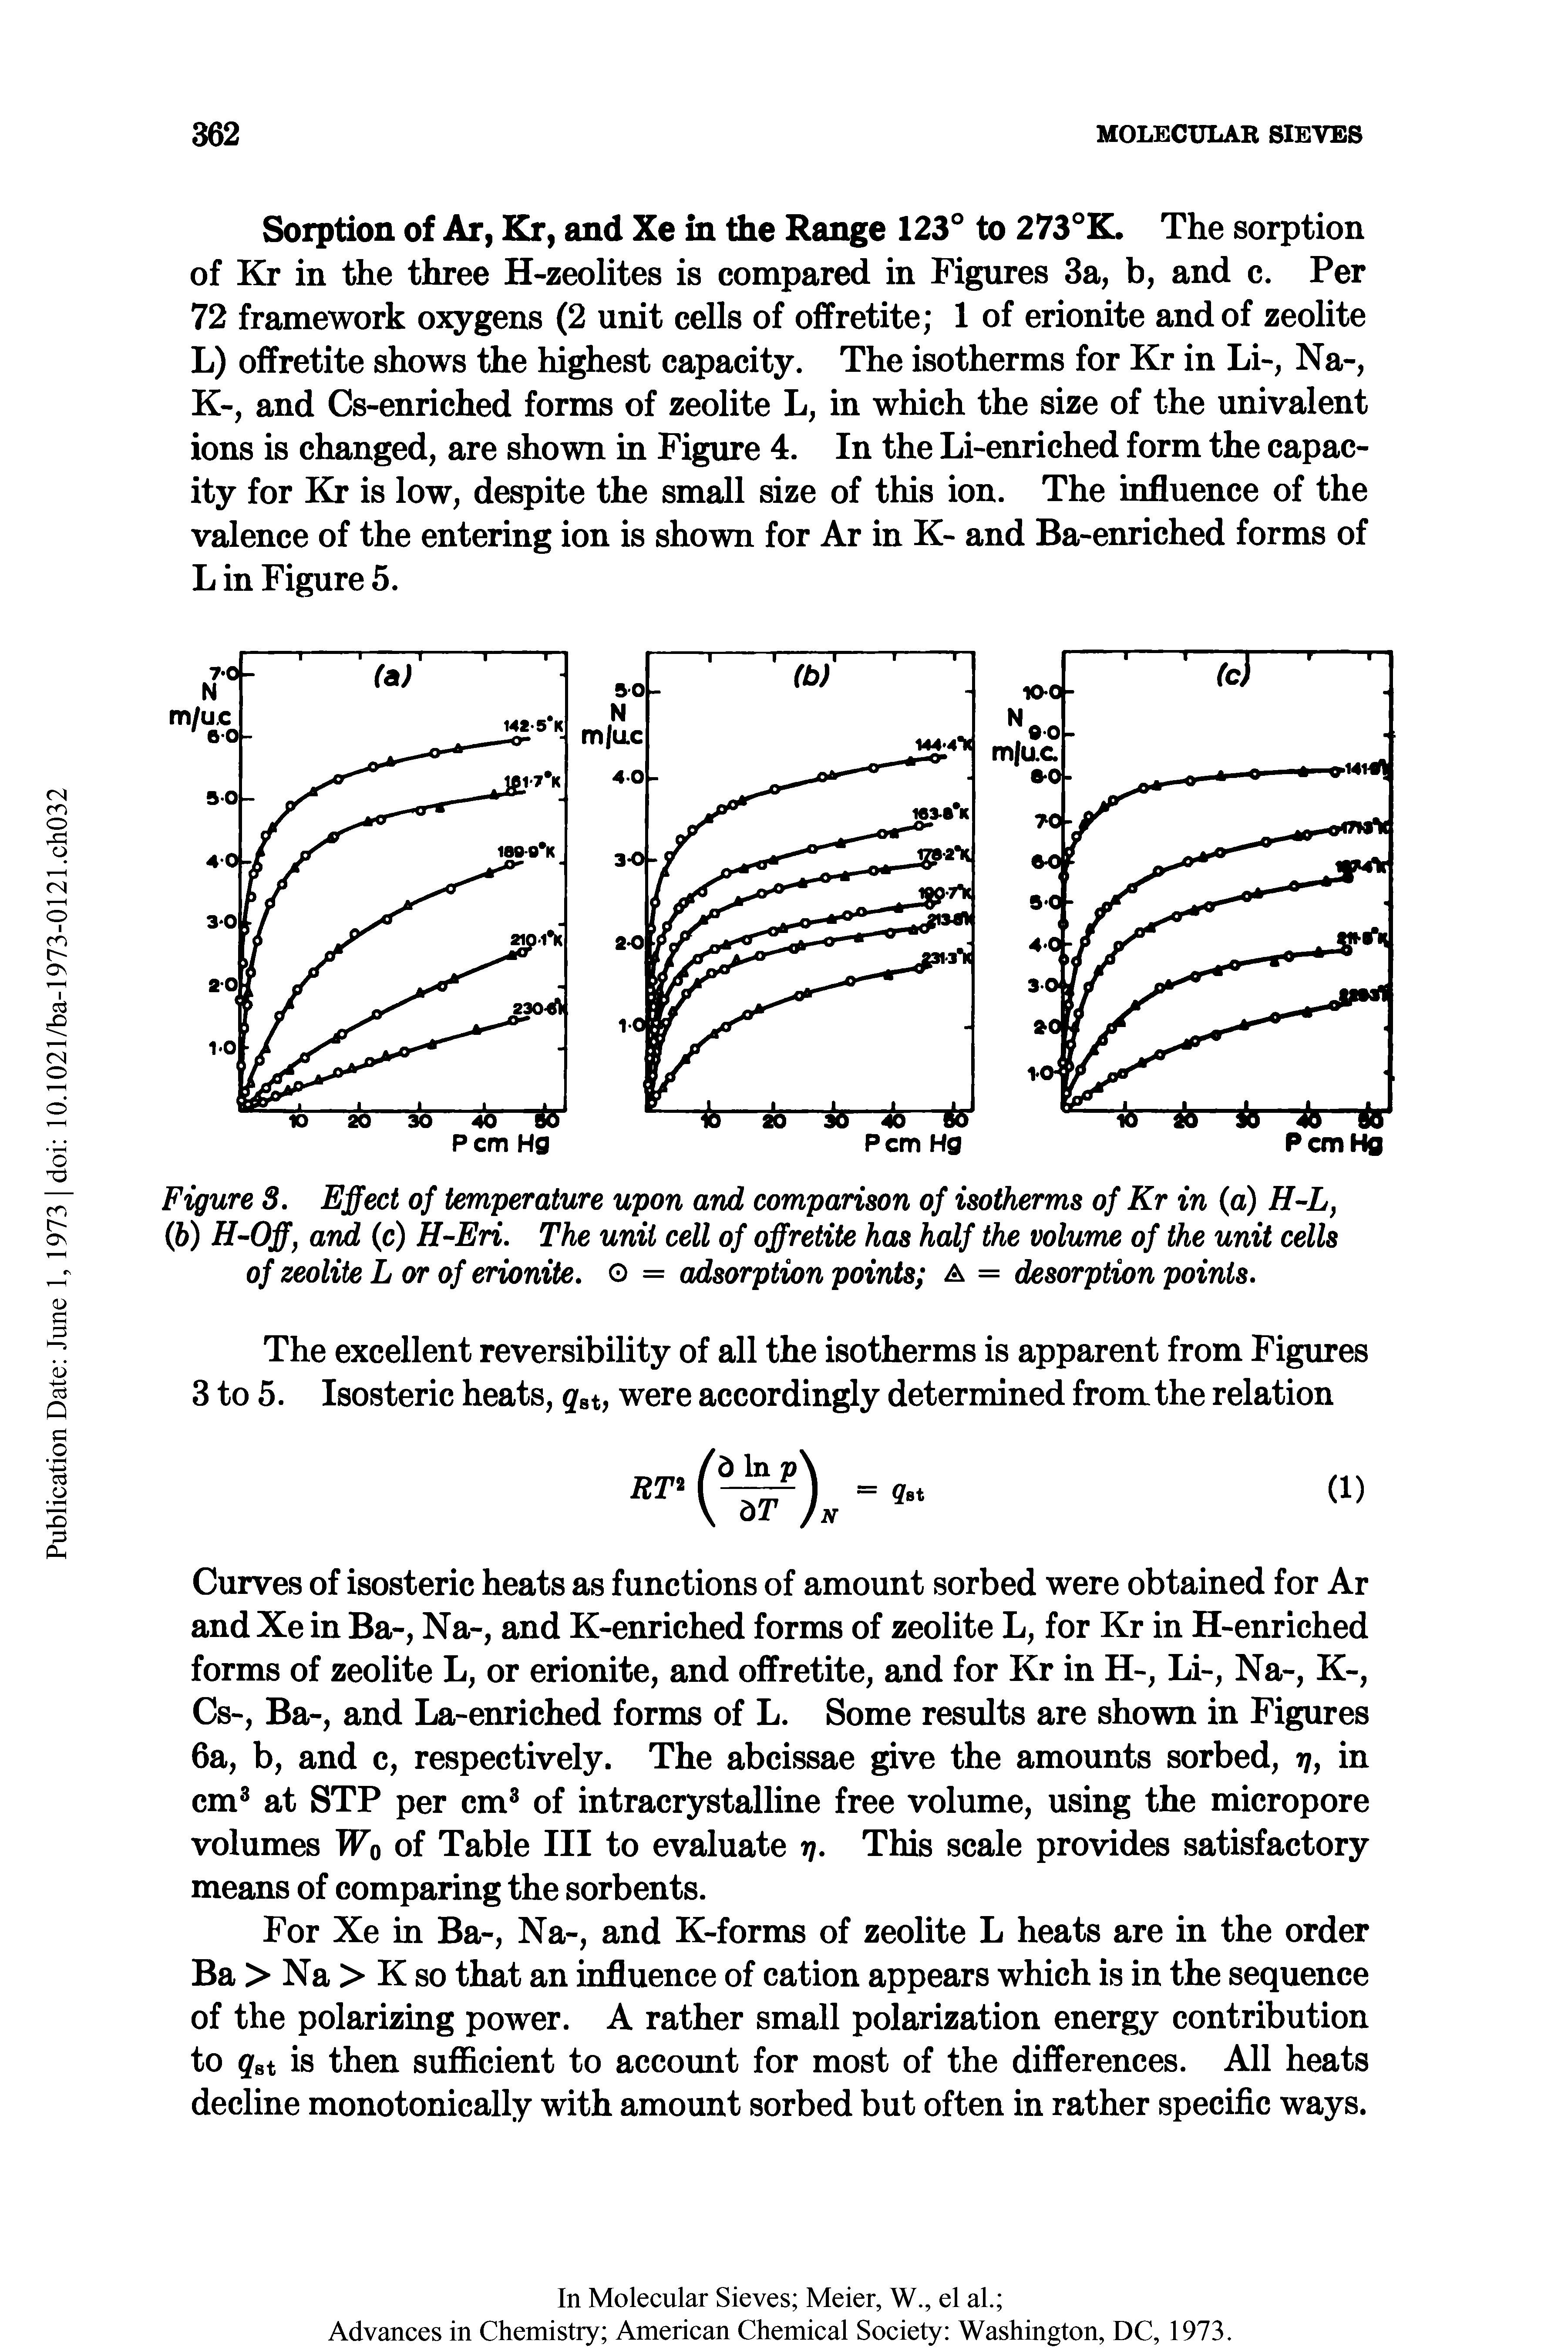 Figure 3. Effect of temperature upon and comparison of isotherms of Kr in (a) H-L, (6) H-Off, and (c) H-Eri. The unit cell of offretite has half the volume of the unit cells of zeolite L or of erionite. o = adsorption points A = desorption points.